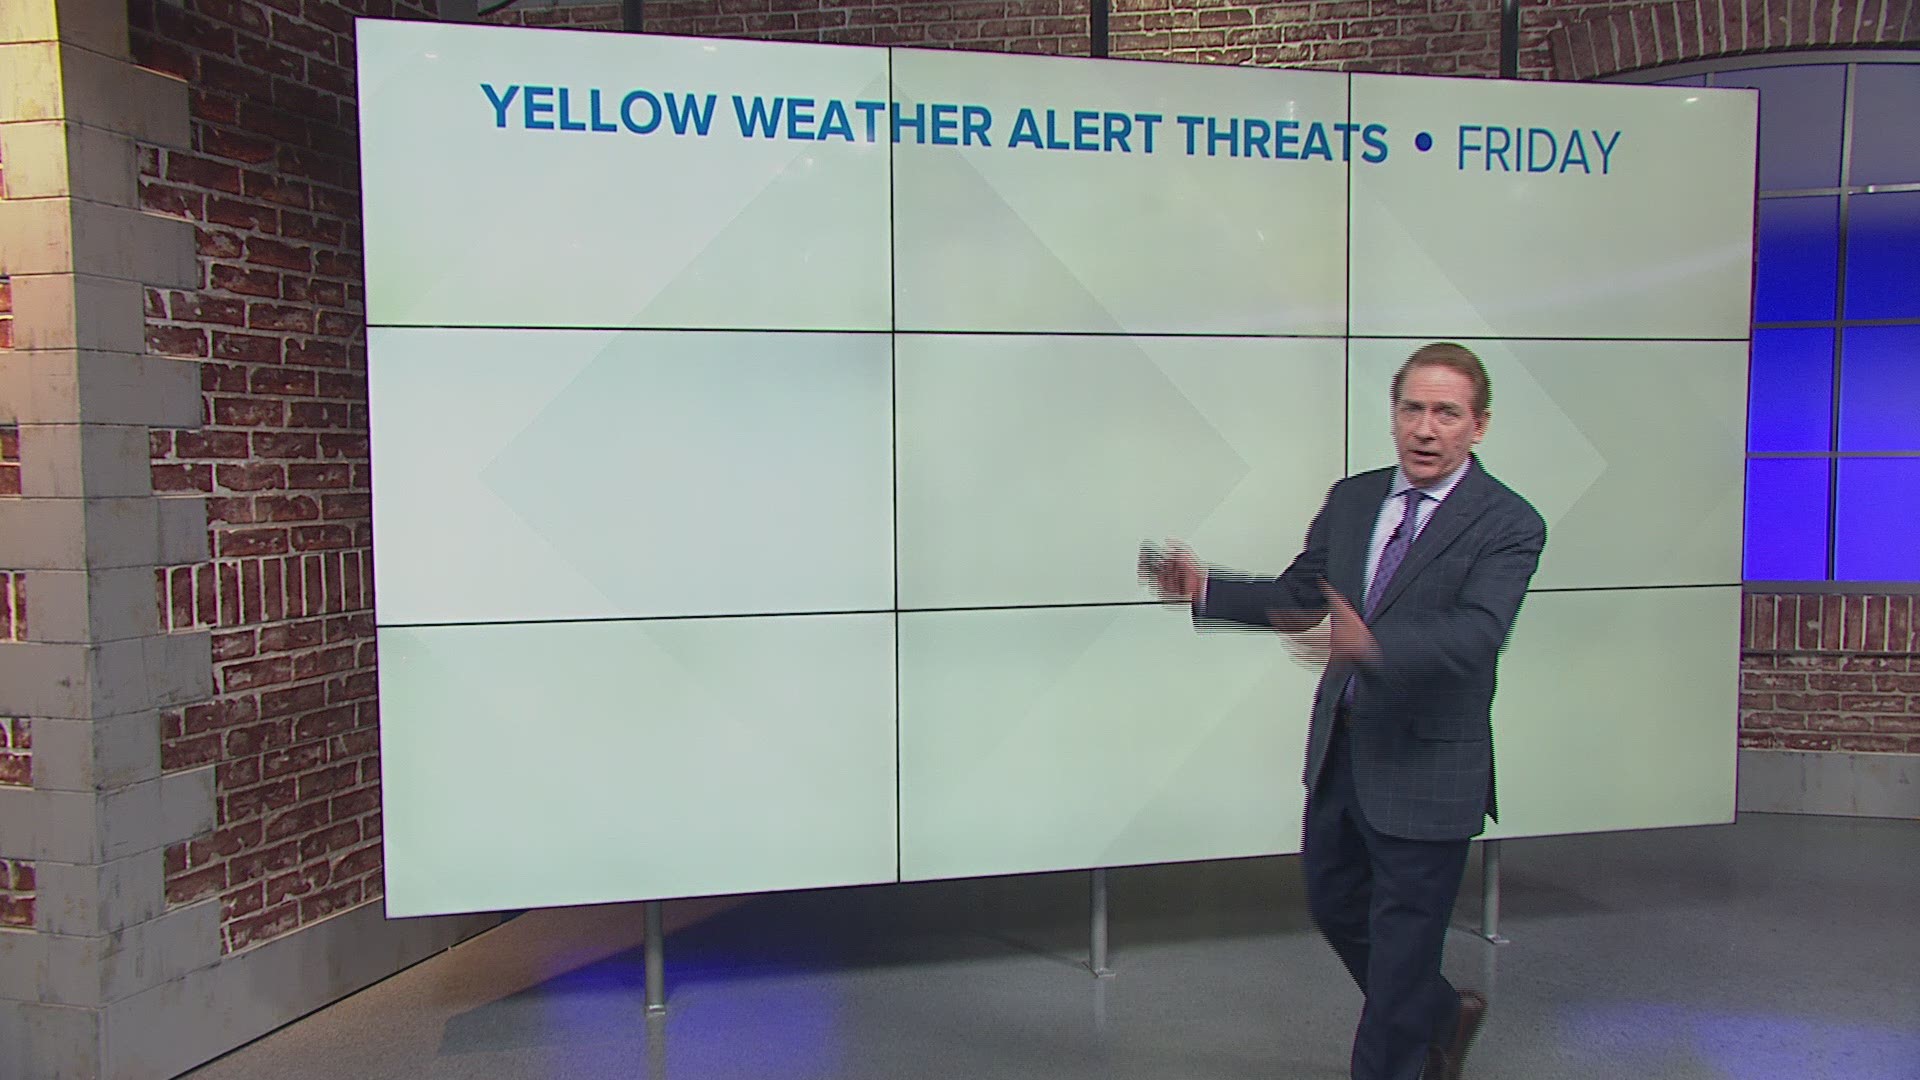 We're looking at a Yellow Weather Alert, with strong winds and storms Friday from noon to about 7 p.m.